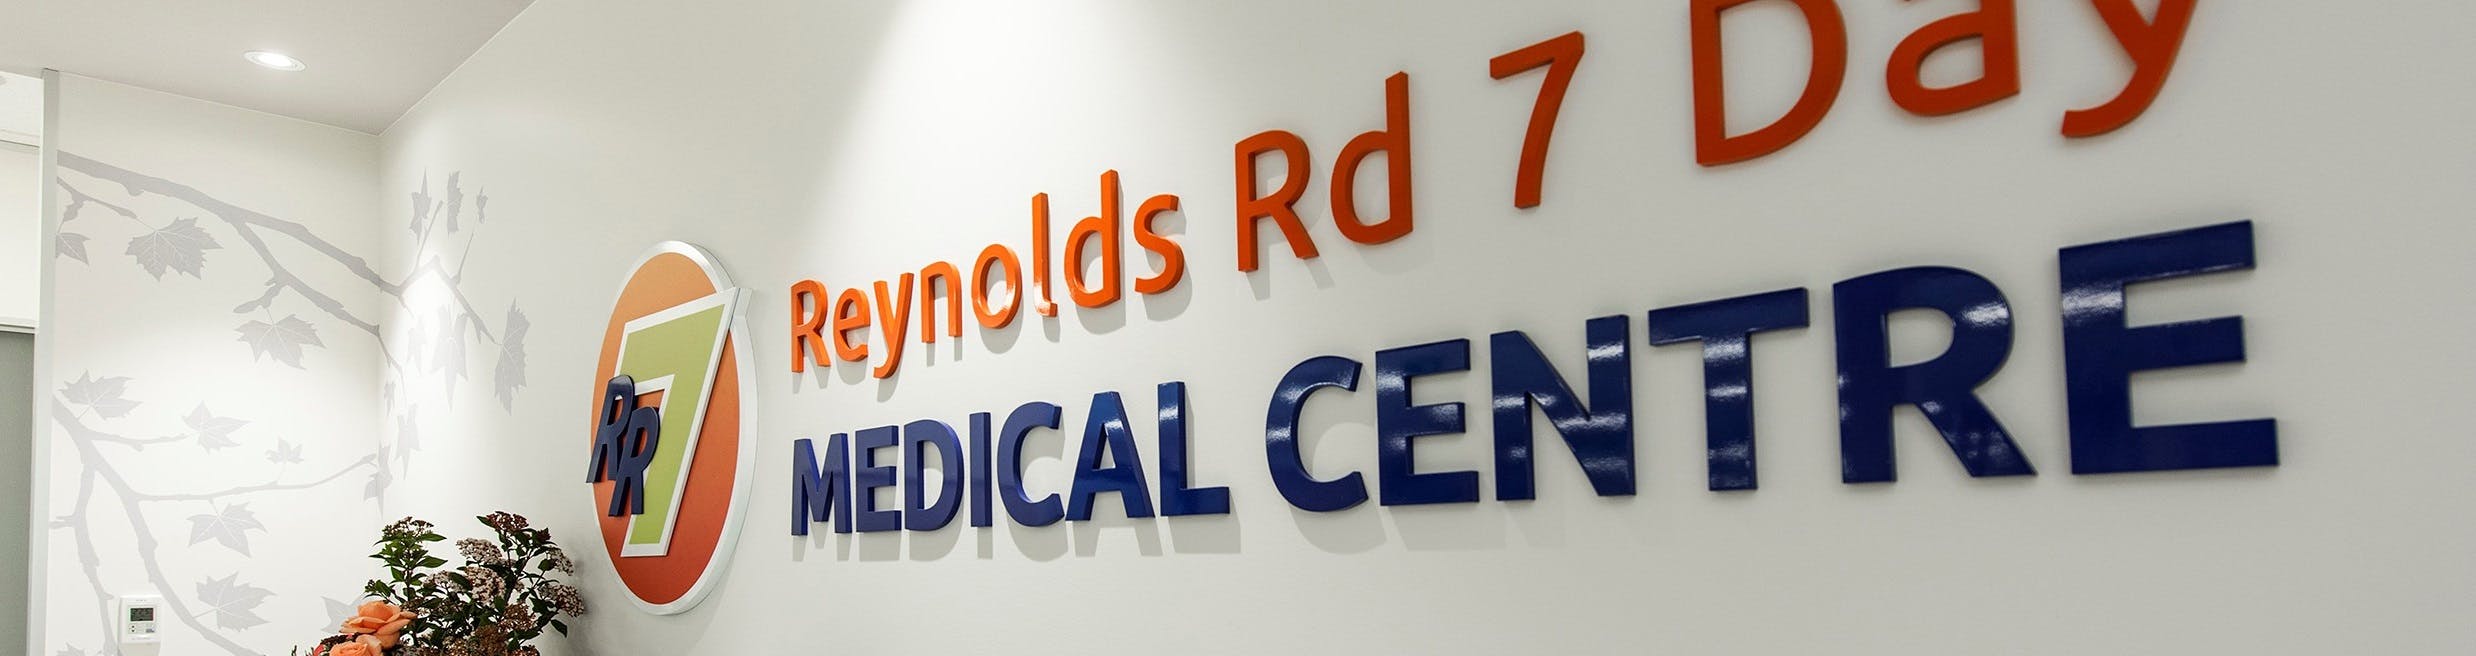 Reynolds Road 7 Day Medical Centre - Book an Appointment Online